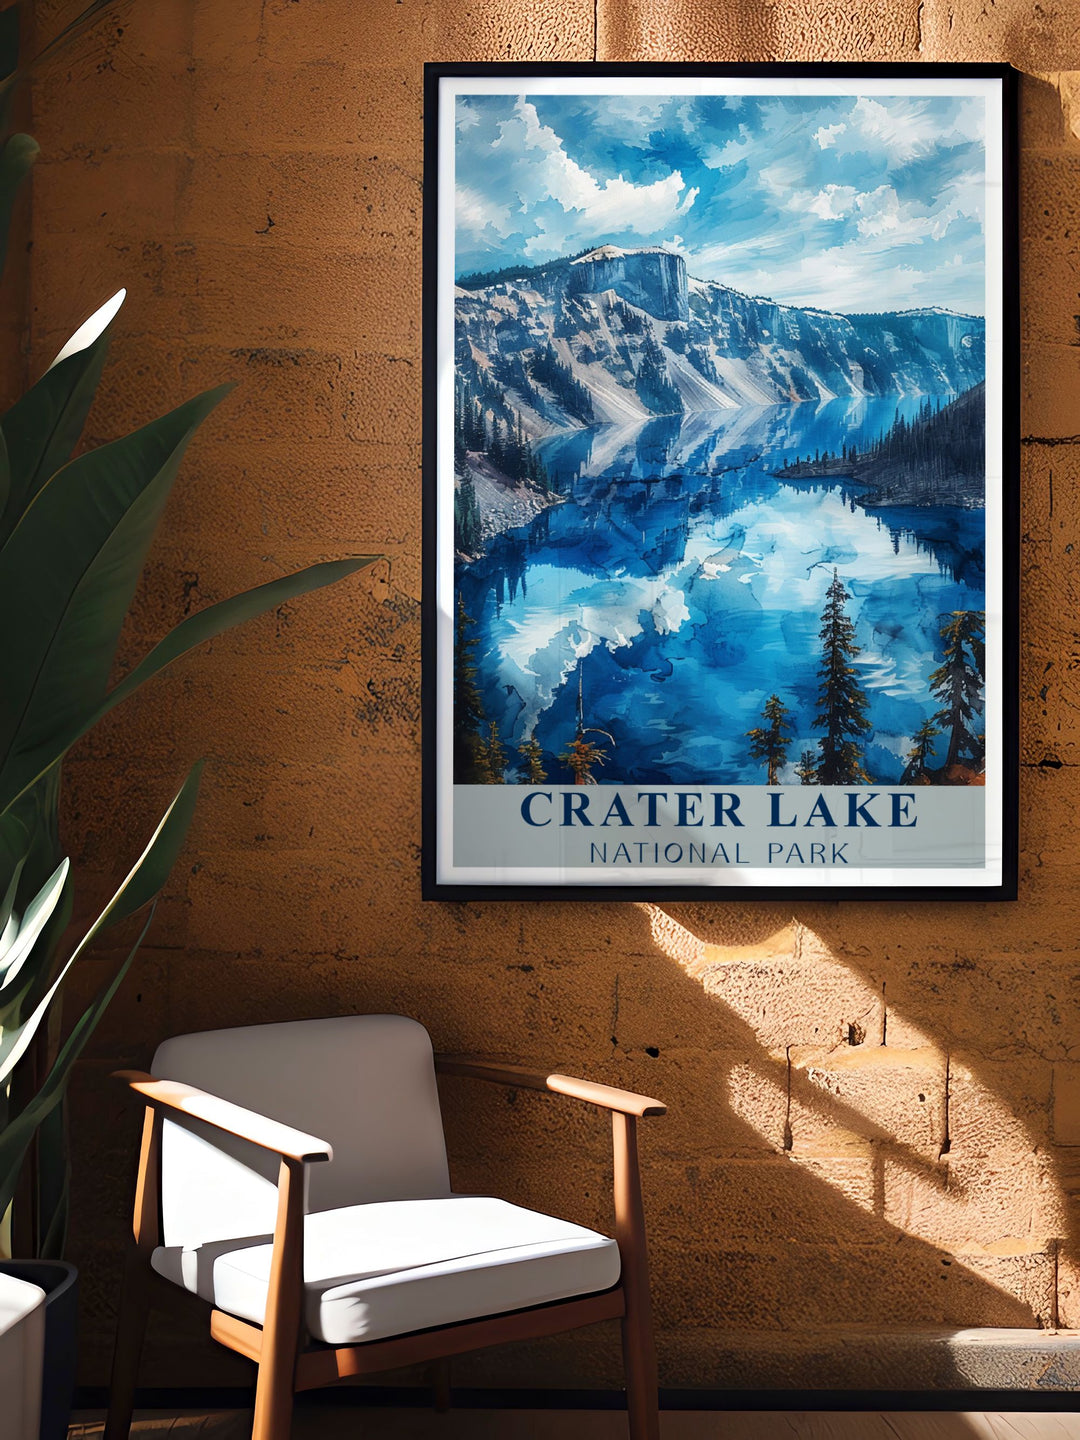 Stunning Crater Lake Artwork showcasing the majestic caldera and deep blue waters. Ideal for home decor and gifts. These prints offer a beautiful representation of one of Americas most stunning national parks.